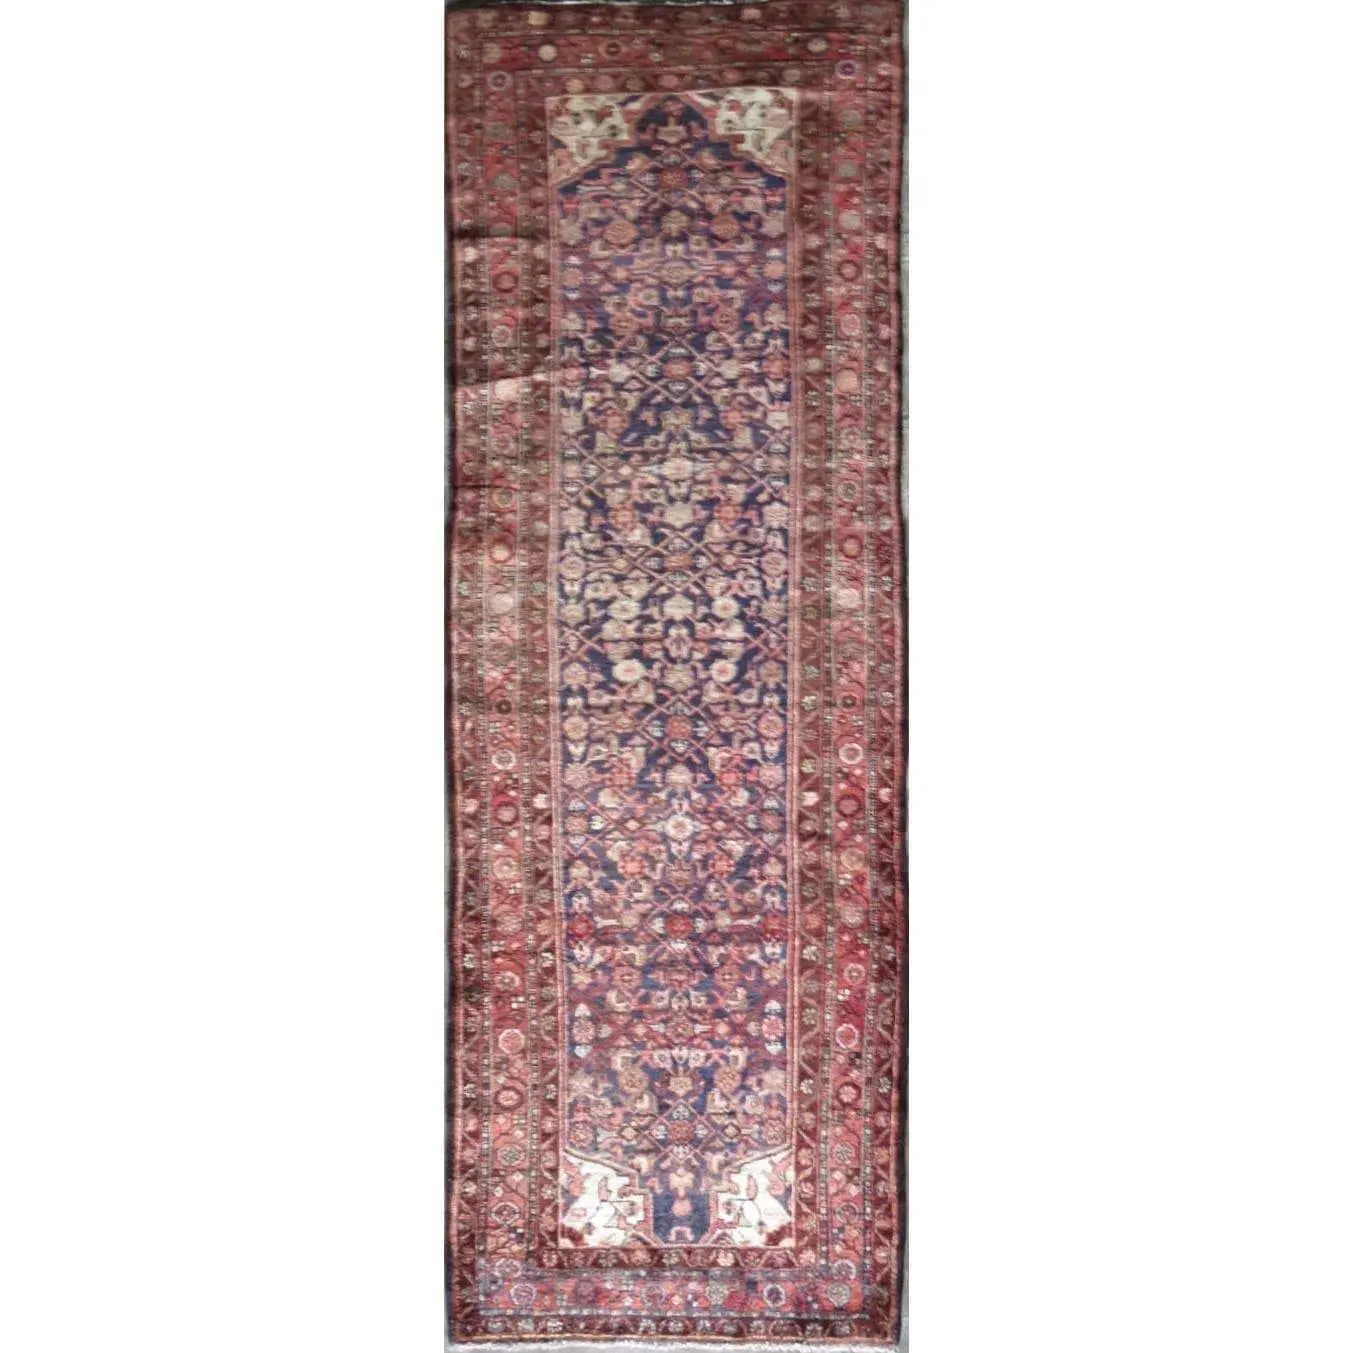 Hand-Knotted Persian Wool Rug _ Luxurious Vintage Design, 9'5" x 3'1", Artisan Crafted